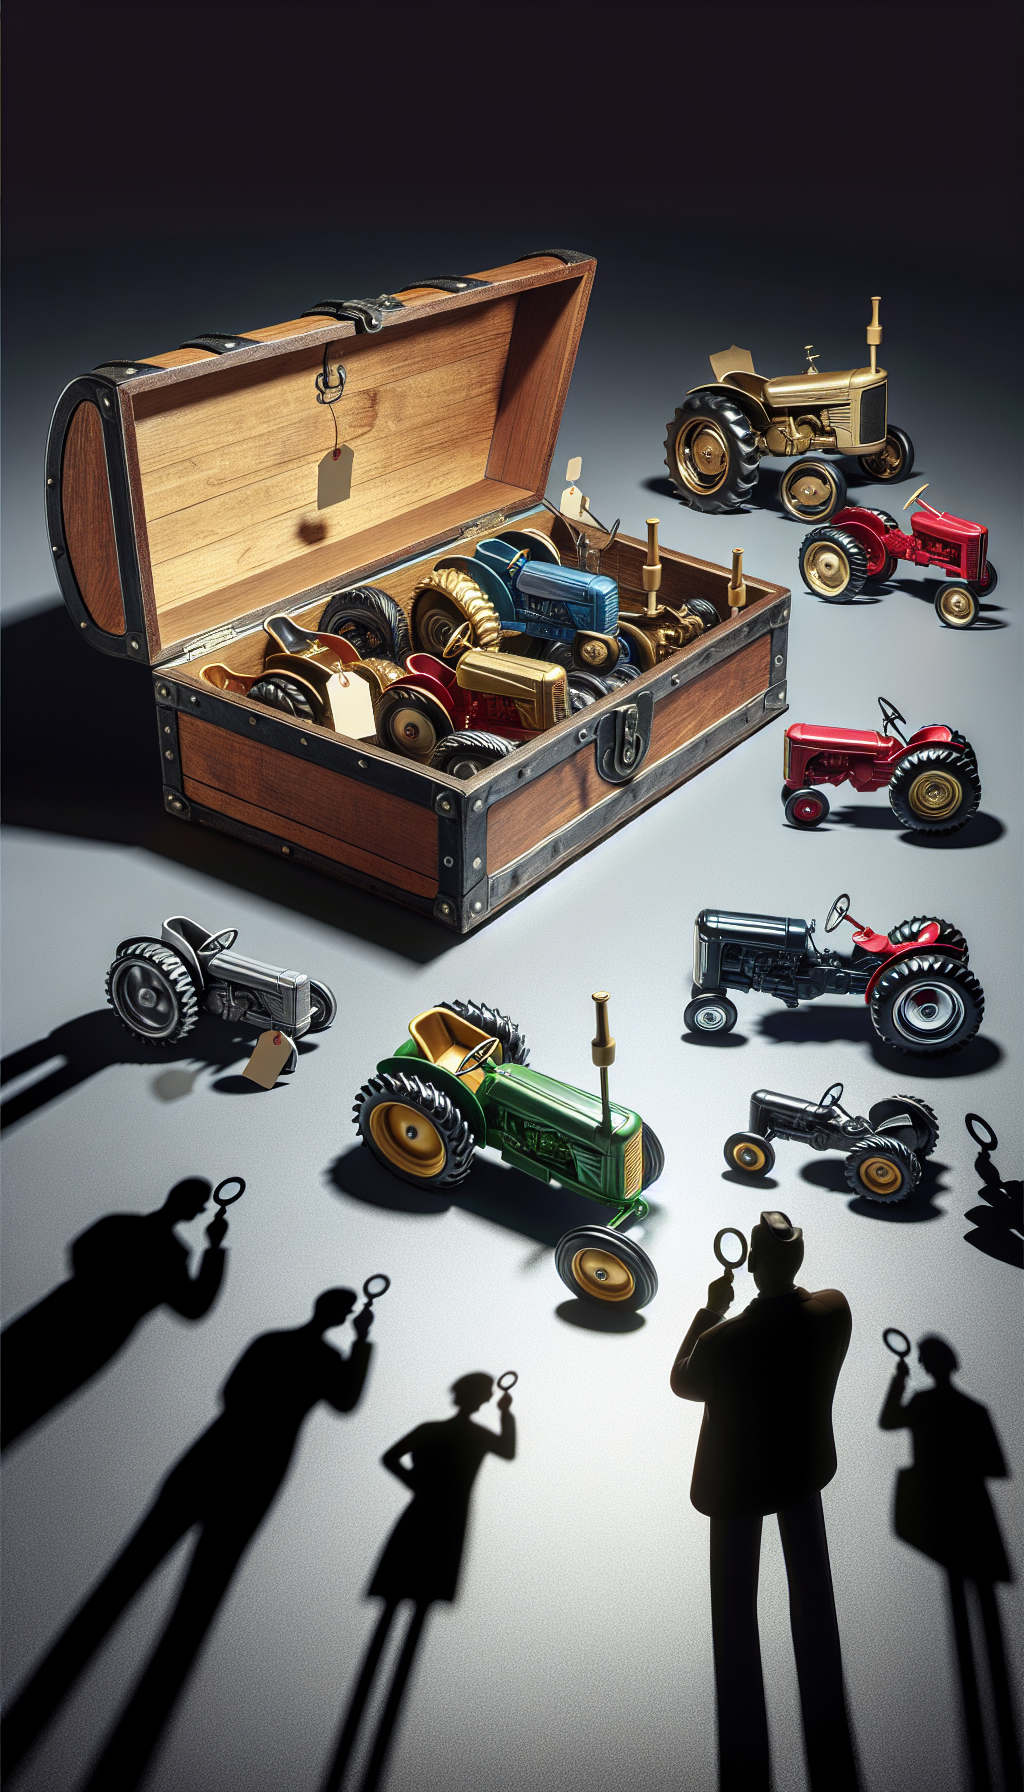 An intricately detailed treasure chest overflowing with beautifully rendered miniature pedal tractors of various vintage styles—like shiny chrome, rustic cast iron, and vibrant primary colors—each with a price tag hanging from them, showcasing their high values. In the background, silhouettes of eager collectors with magnifying glasses examine the rare finds, reinforcing the allure and exclusivity of the collectors' corner.